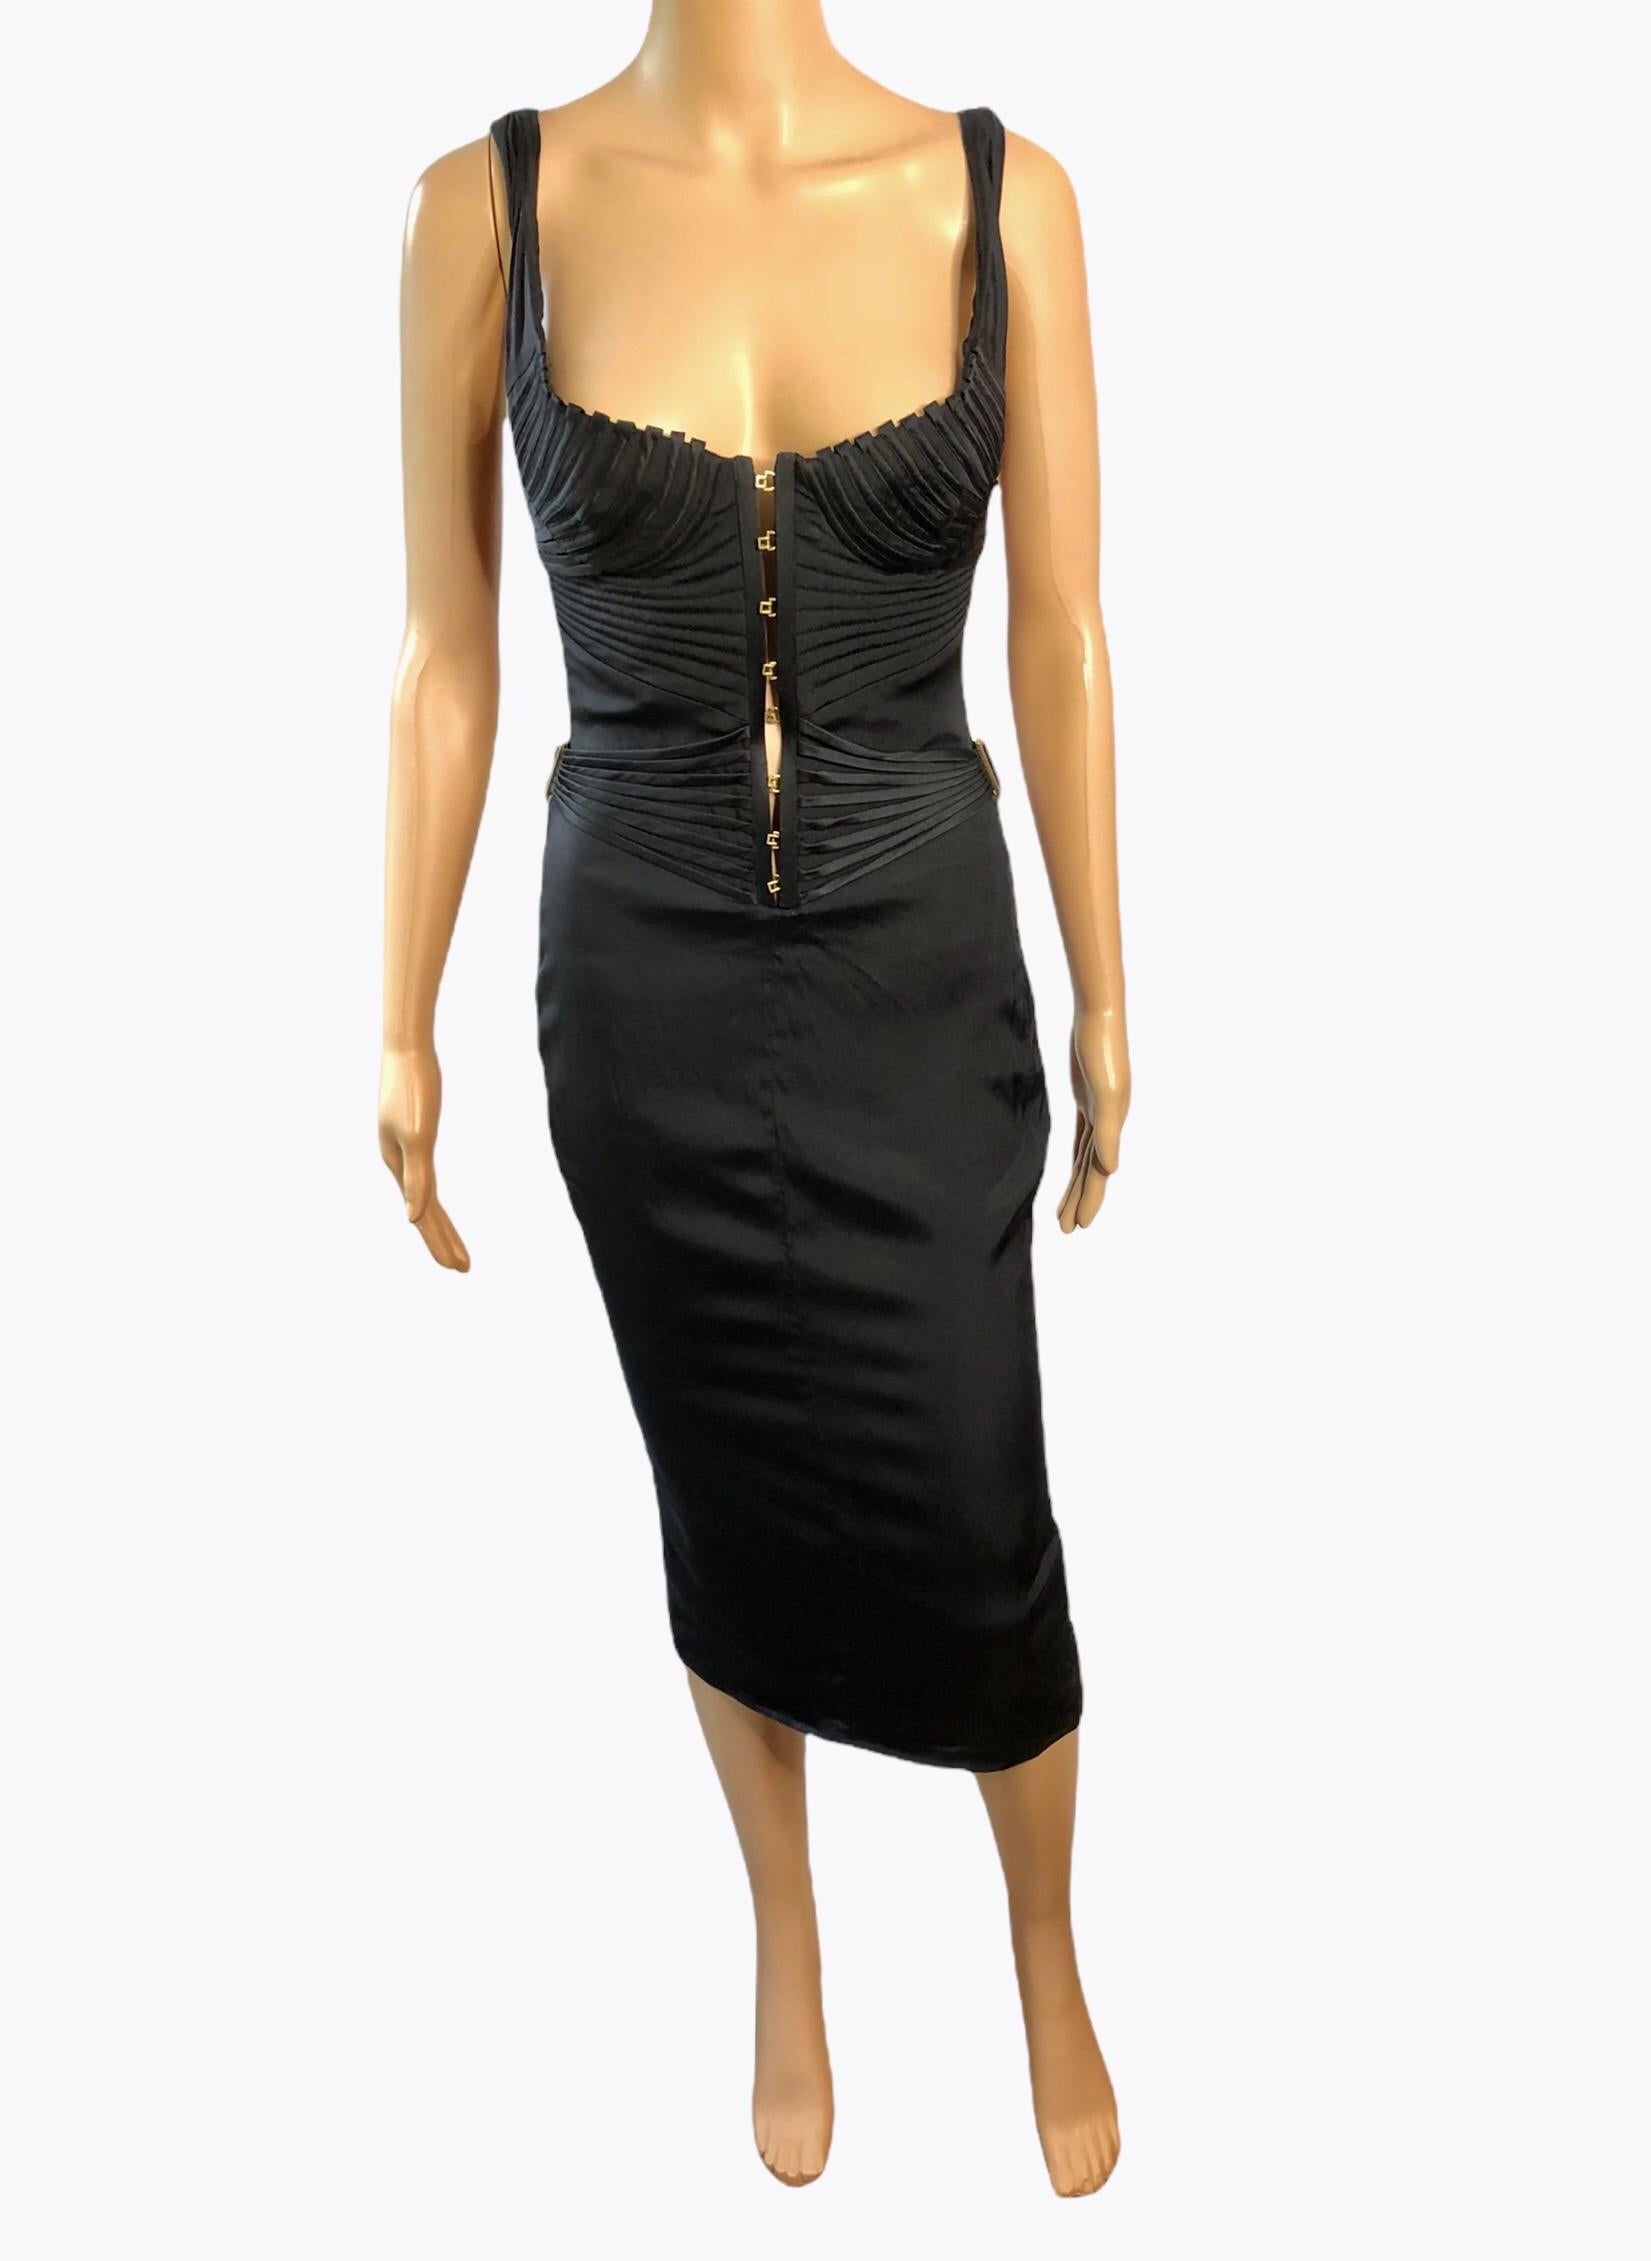 Tom Ford for Gucci F/W 2003 Runway Bustier Corset Silk Black Dress In Good Condition For Sale In Naples, FL